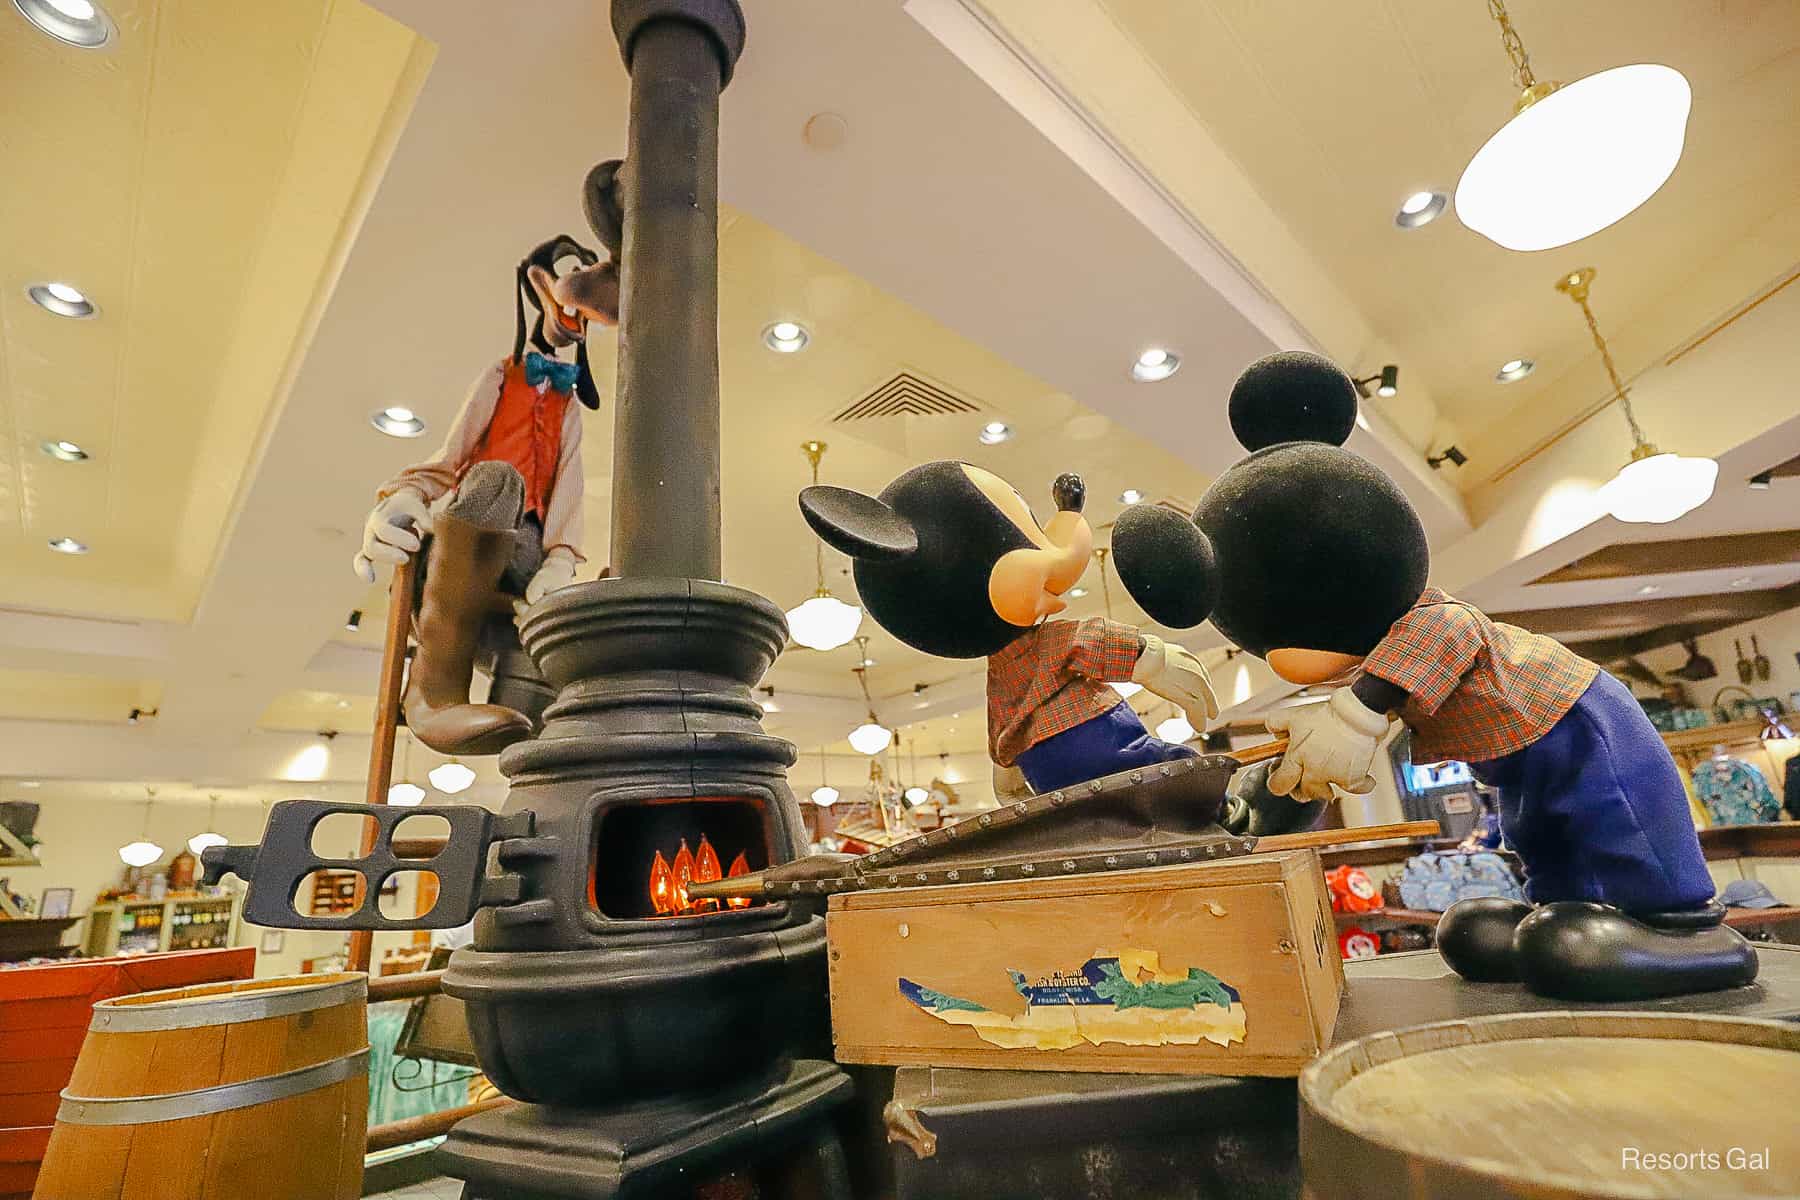 Mickey's little ones blowing air into the fire 